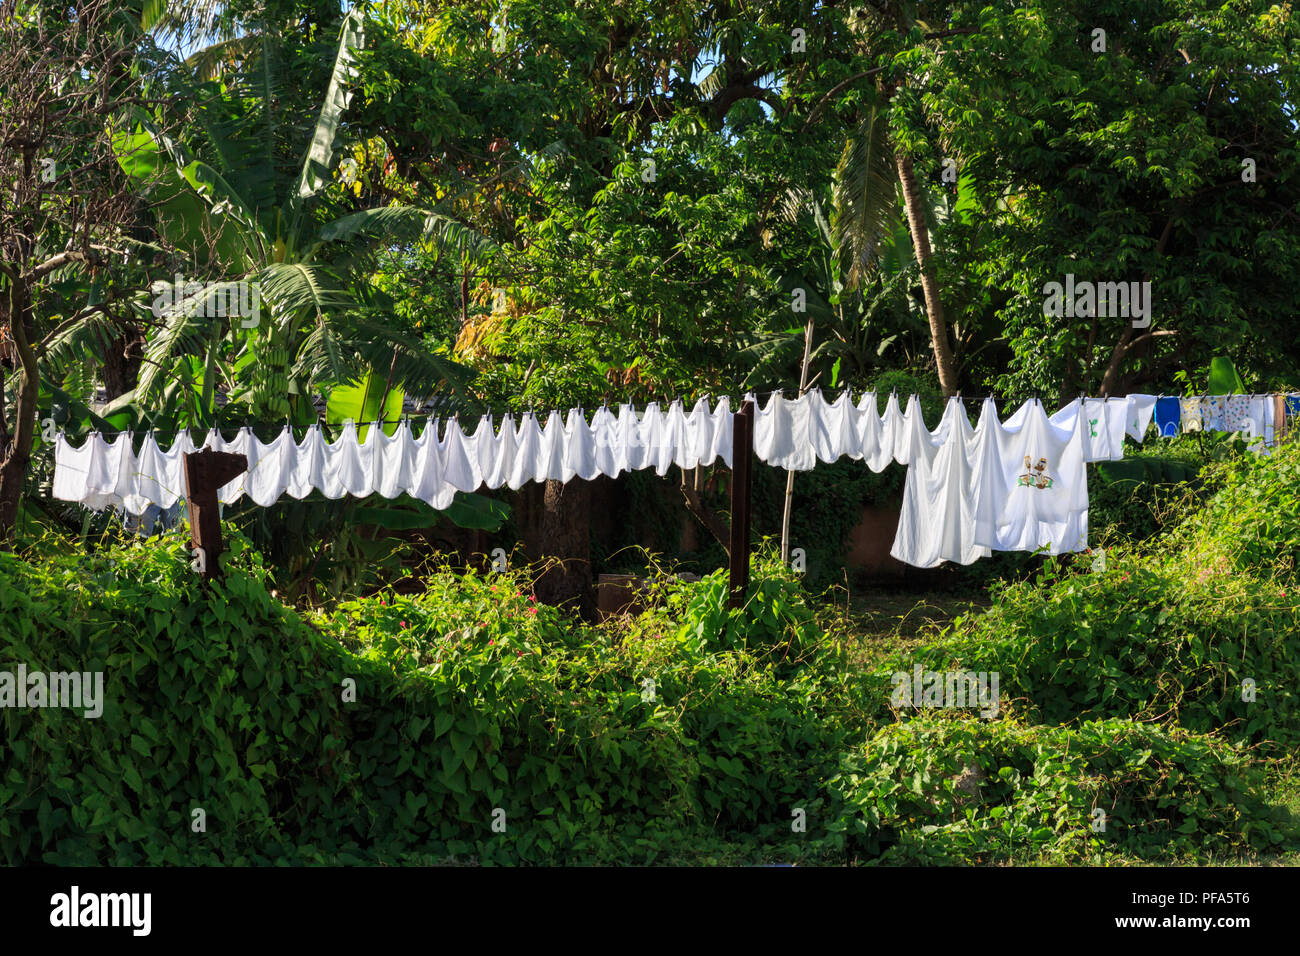 Washing line with white clothes and cotton towels, hanging laundry outside in green garden, rural Cuba Stock Photo